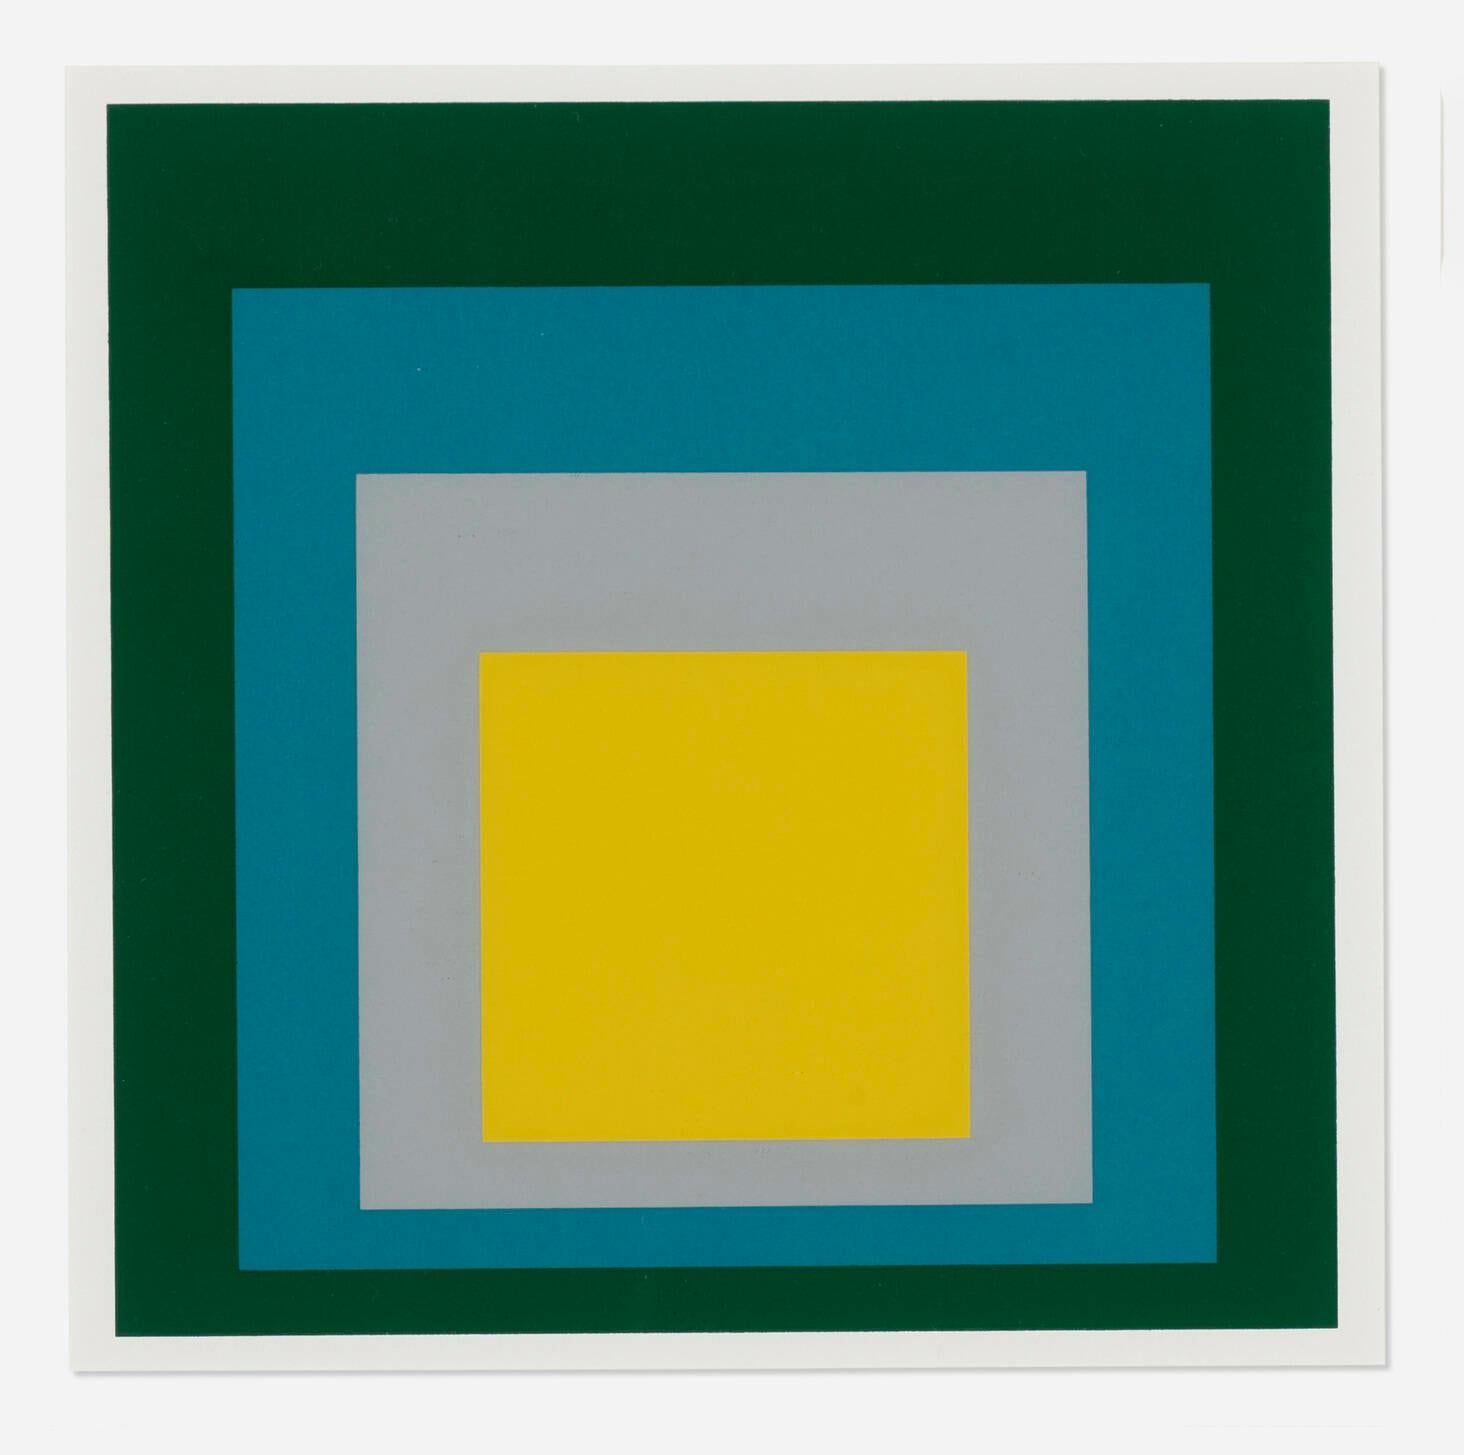 Artist: After Josef Albers, German (1888 - 1976)
Title: "Homage to the Square : Park 1967" From New Paintings NY First edition
Year: 1968
Medium: Screenprint
Edition Size: Unknoun, presumed small edition
Image Size: 7.5 x 7.5 Inches
over all with